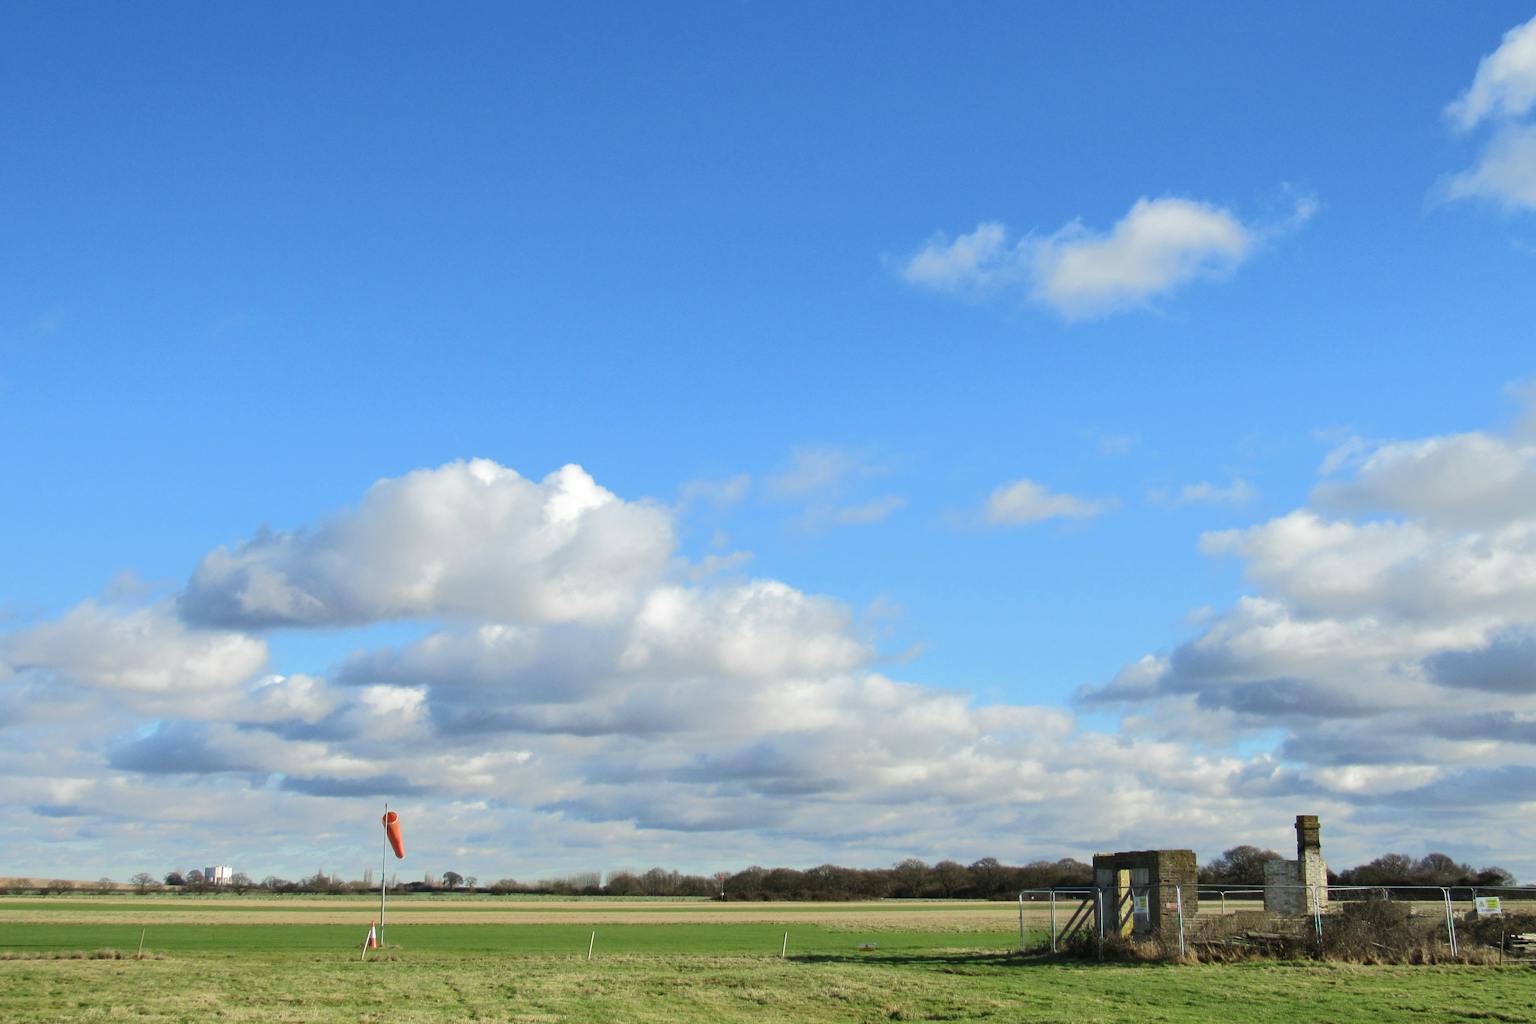 The airfield and derelict buildings at Stow Maries